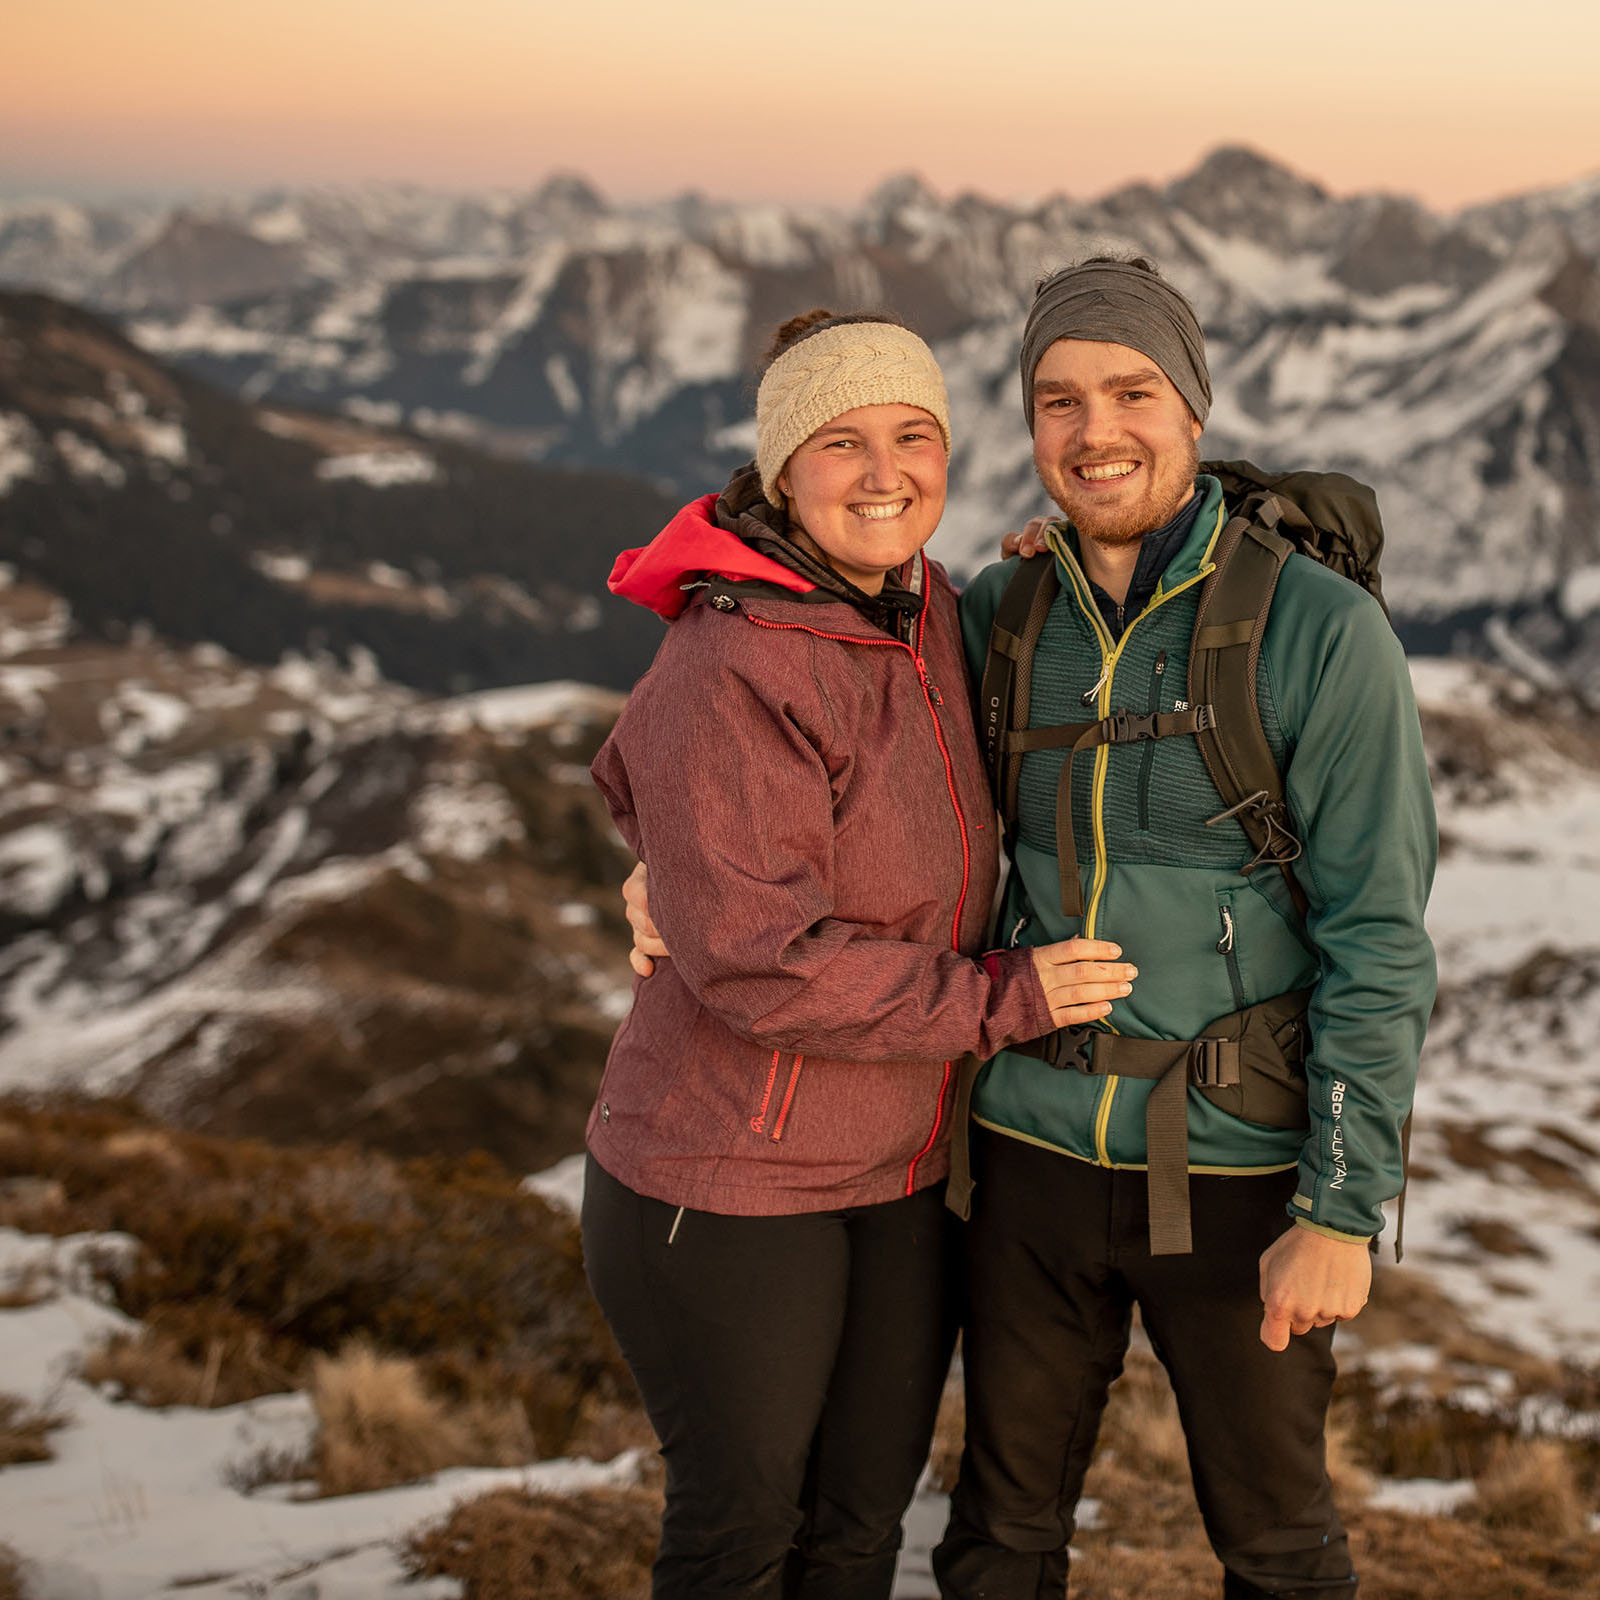 Wild Embrace Photo and Film Team for Elopement weddings on a mountain in the Alps